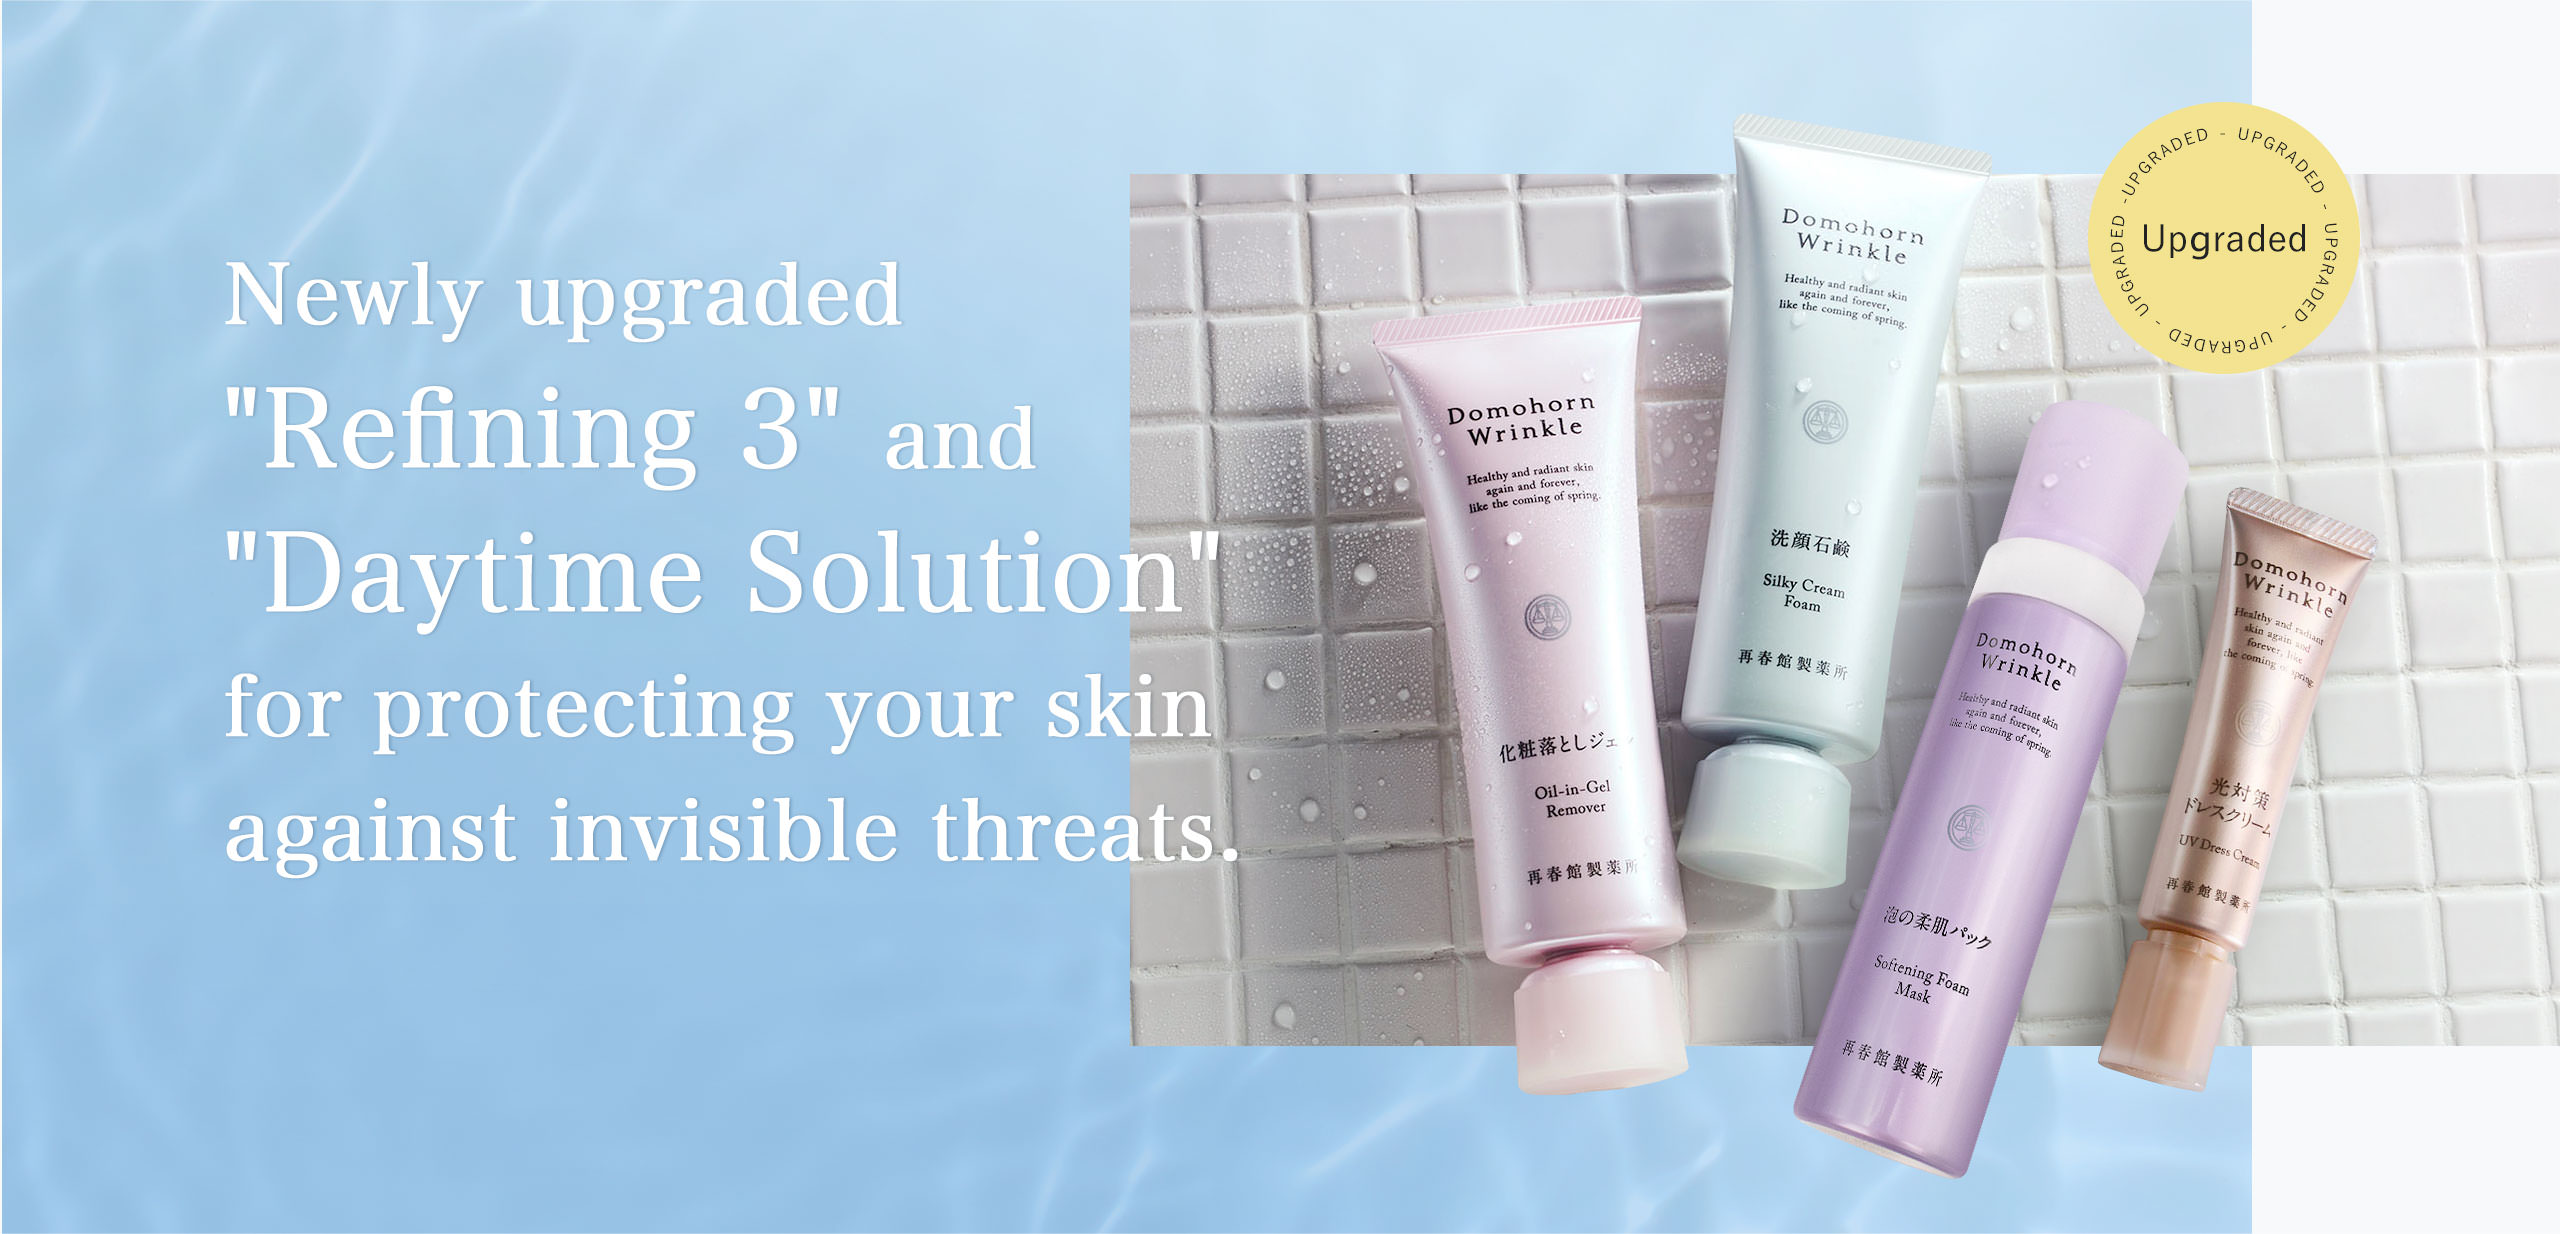 Newly upgraded "Refining 3" and "Daytime Solution" for protecting your skin against invisible threats.